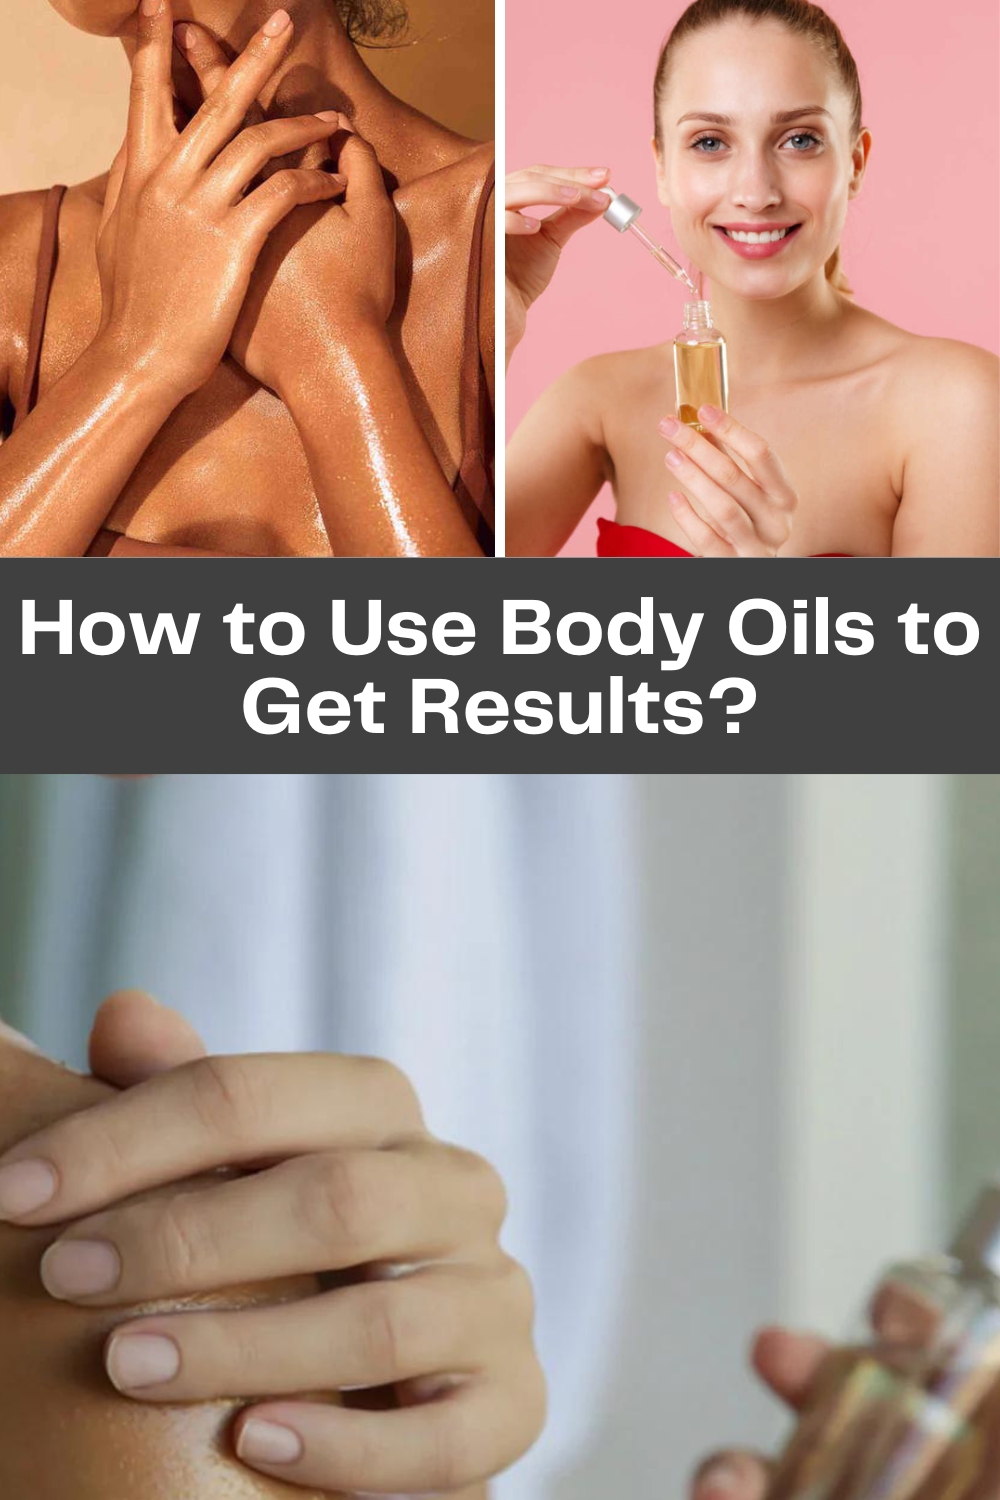 How to use body oils